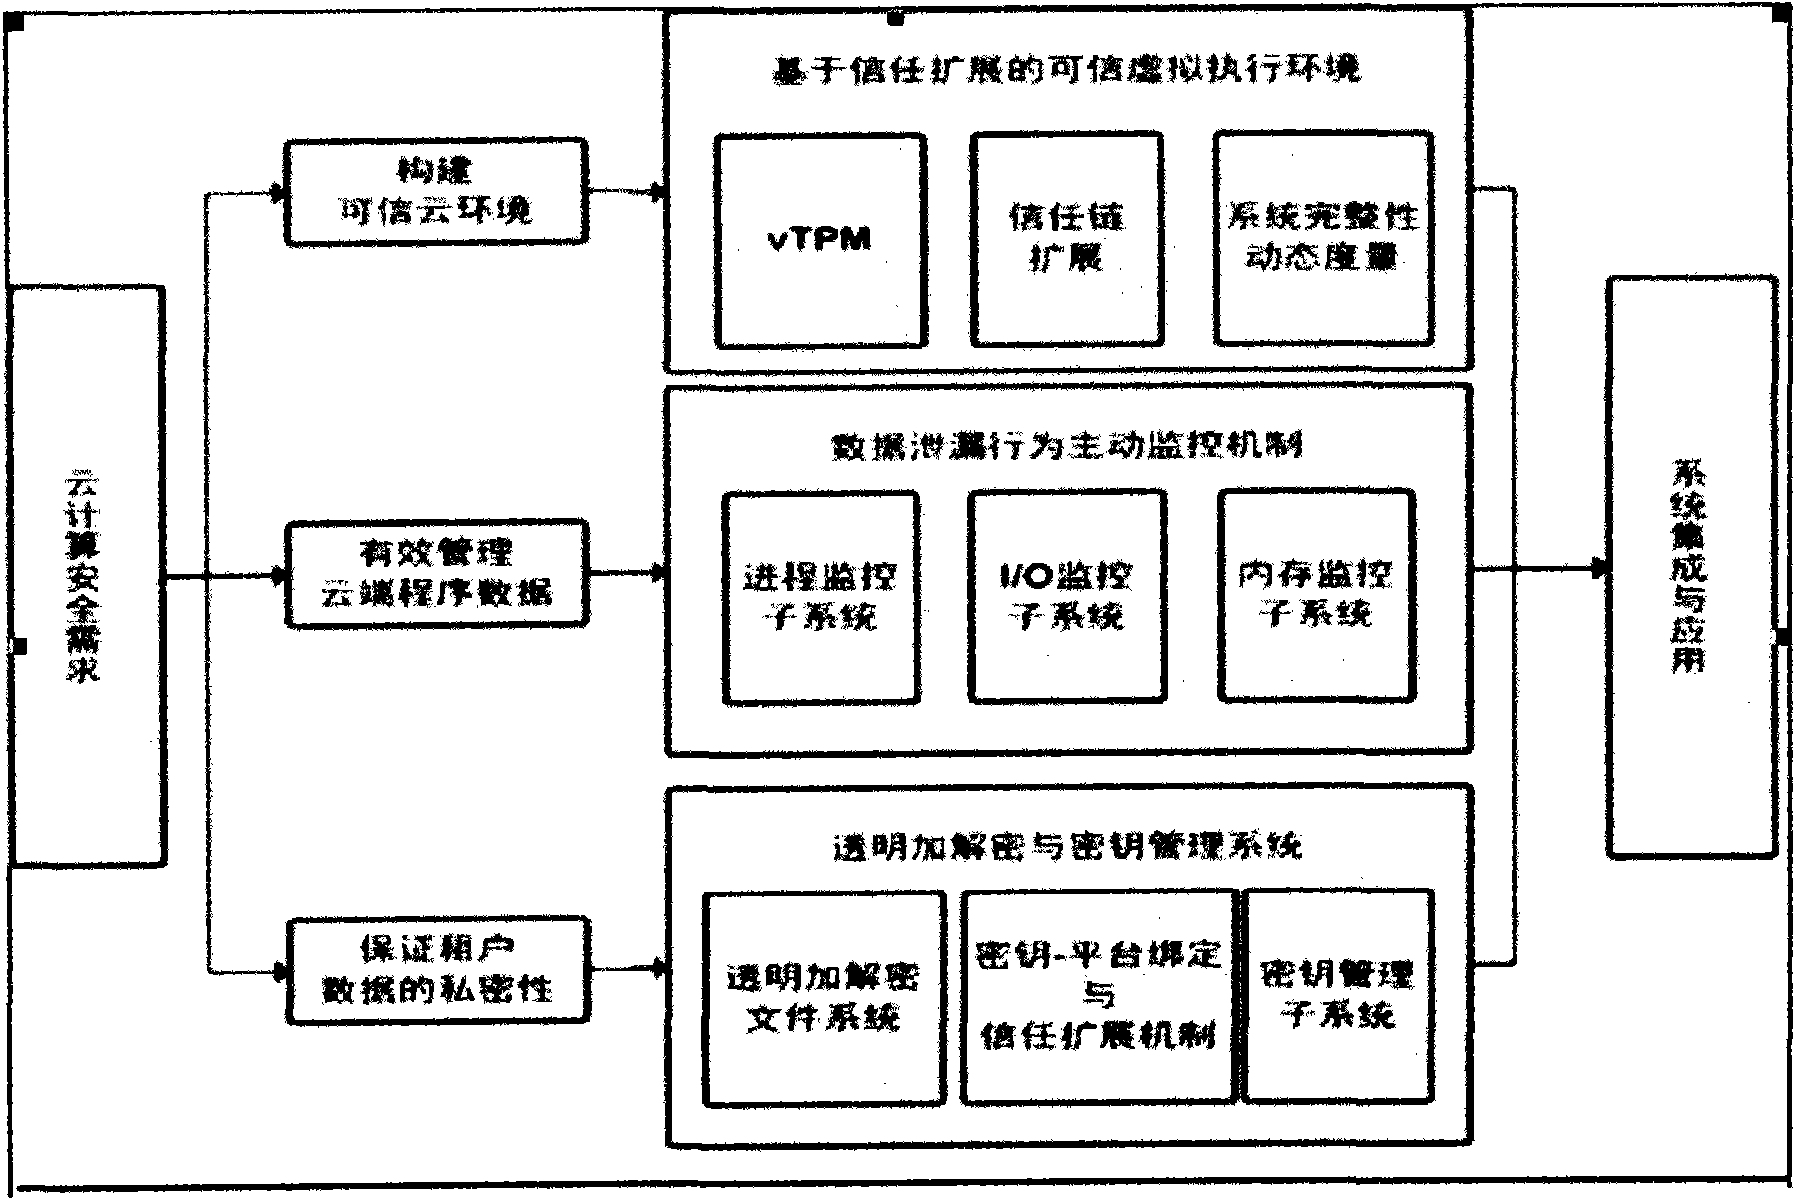 Dependable security cloud computing composition method